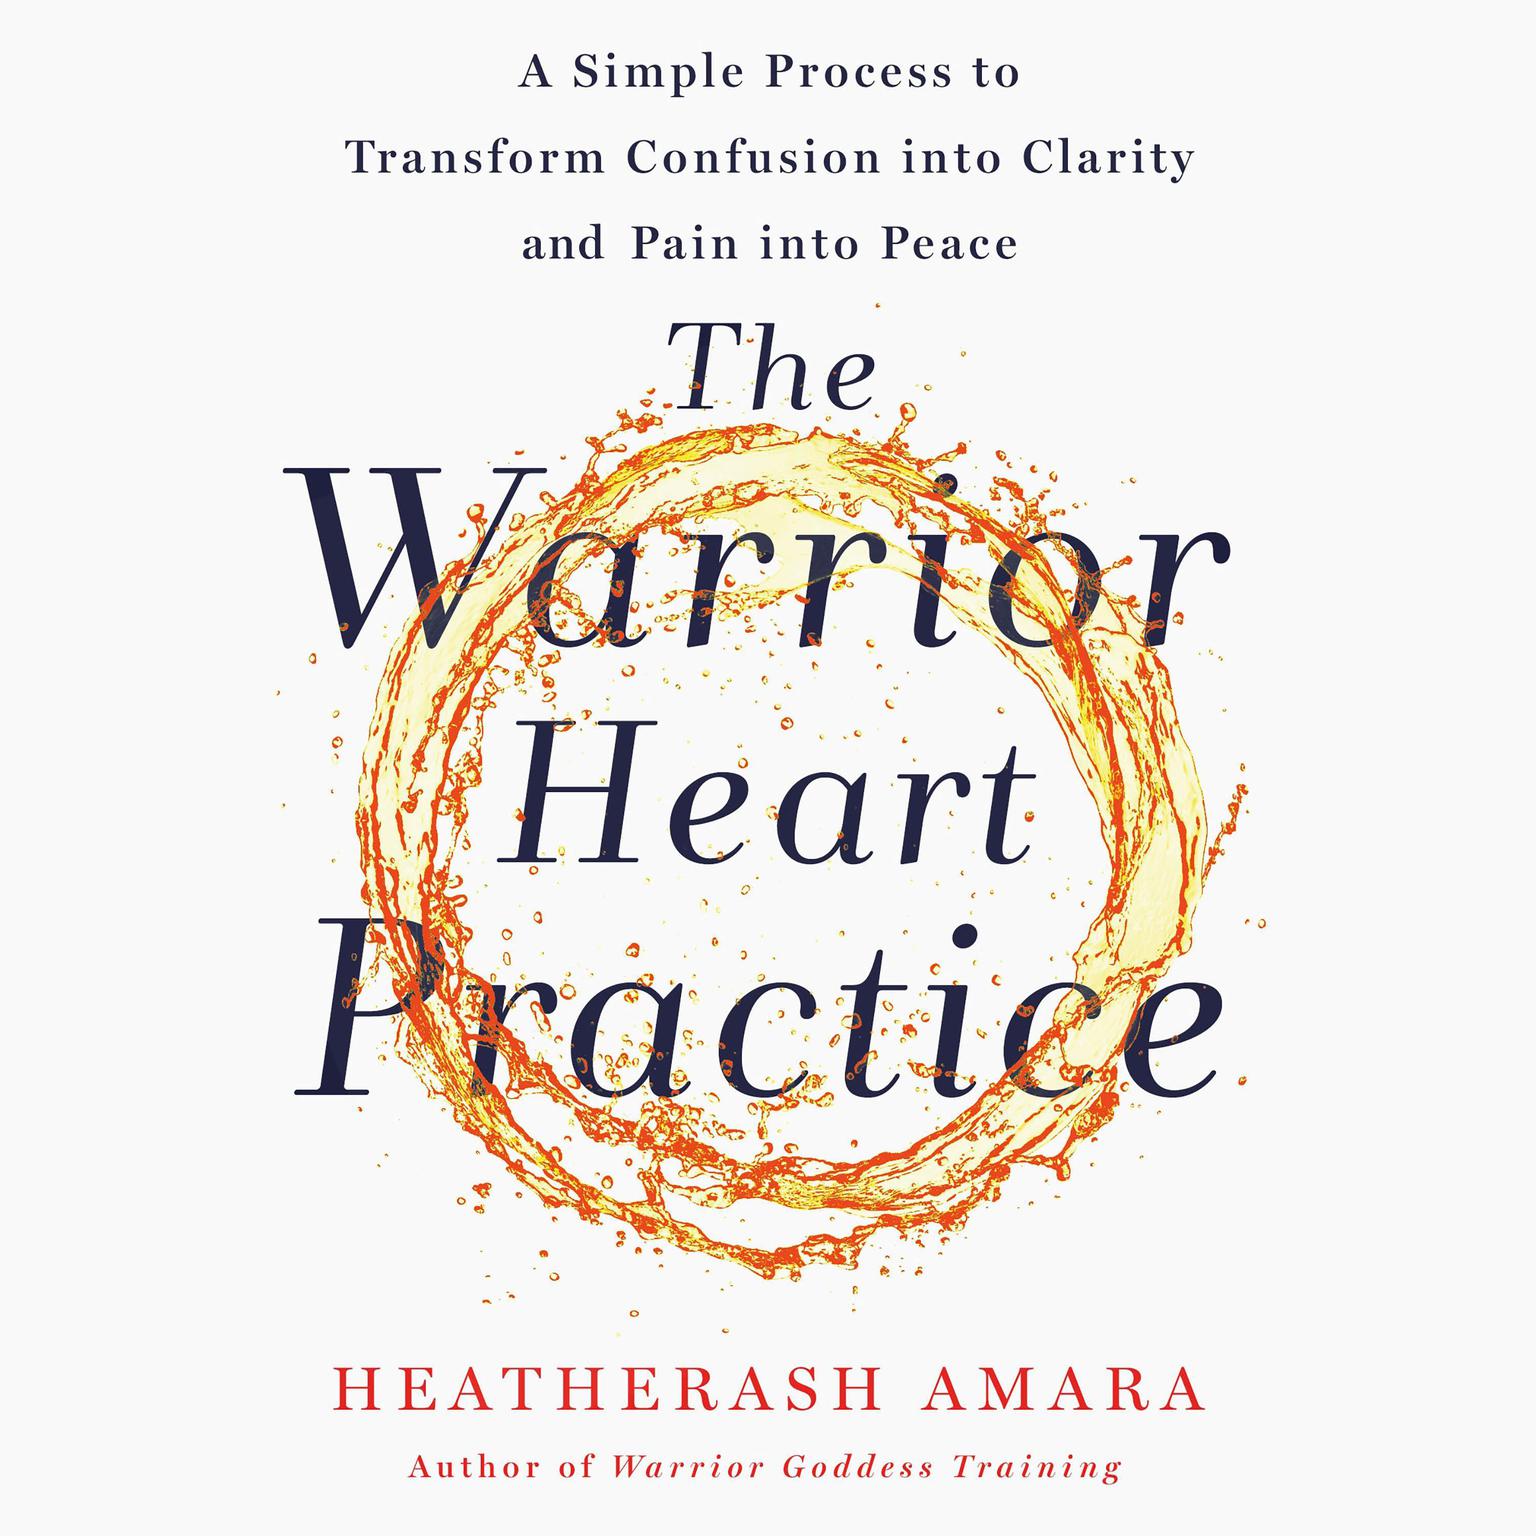 The Warrior Heart Practice: A Simple Process to Transform Confusion into Clarity and Pain into Peace (A Warrior Goddess Book) Audiobook, by HeatherAsh Amara